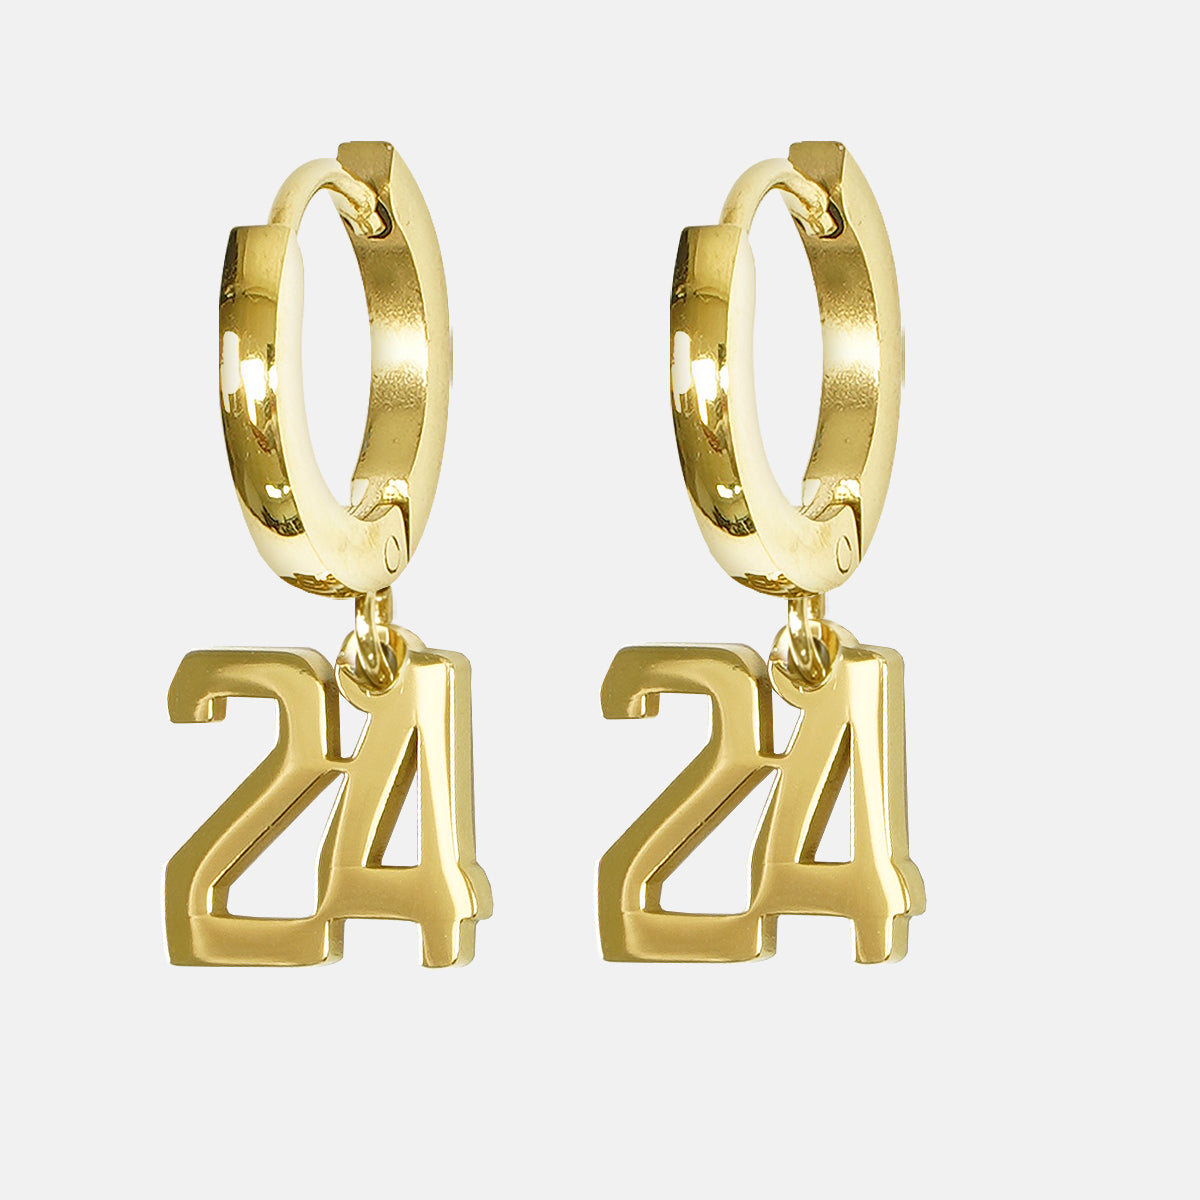 24 Number Earring - Gold Plated Stainless Steel